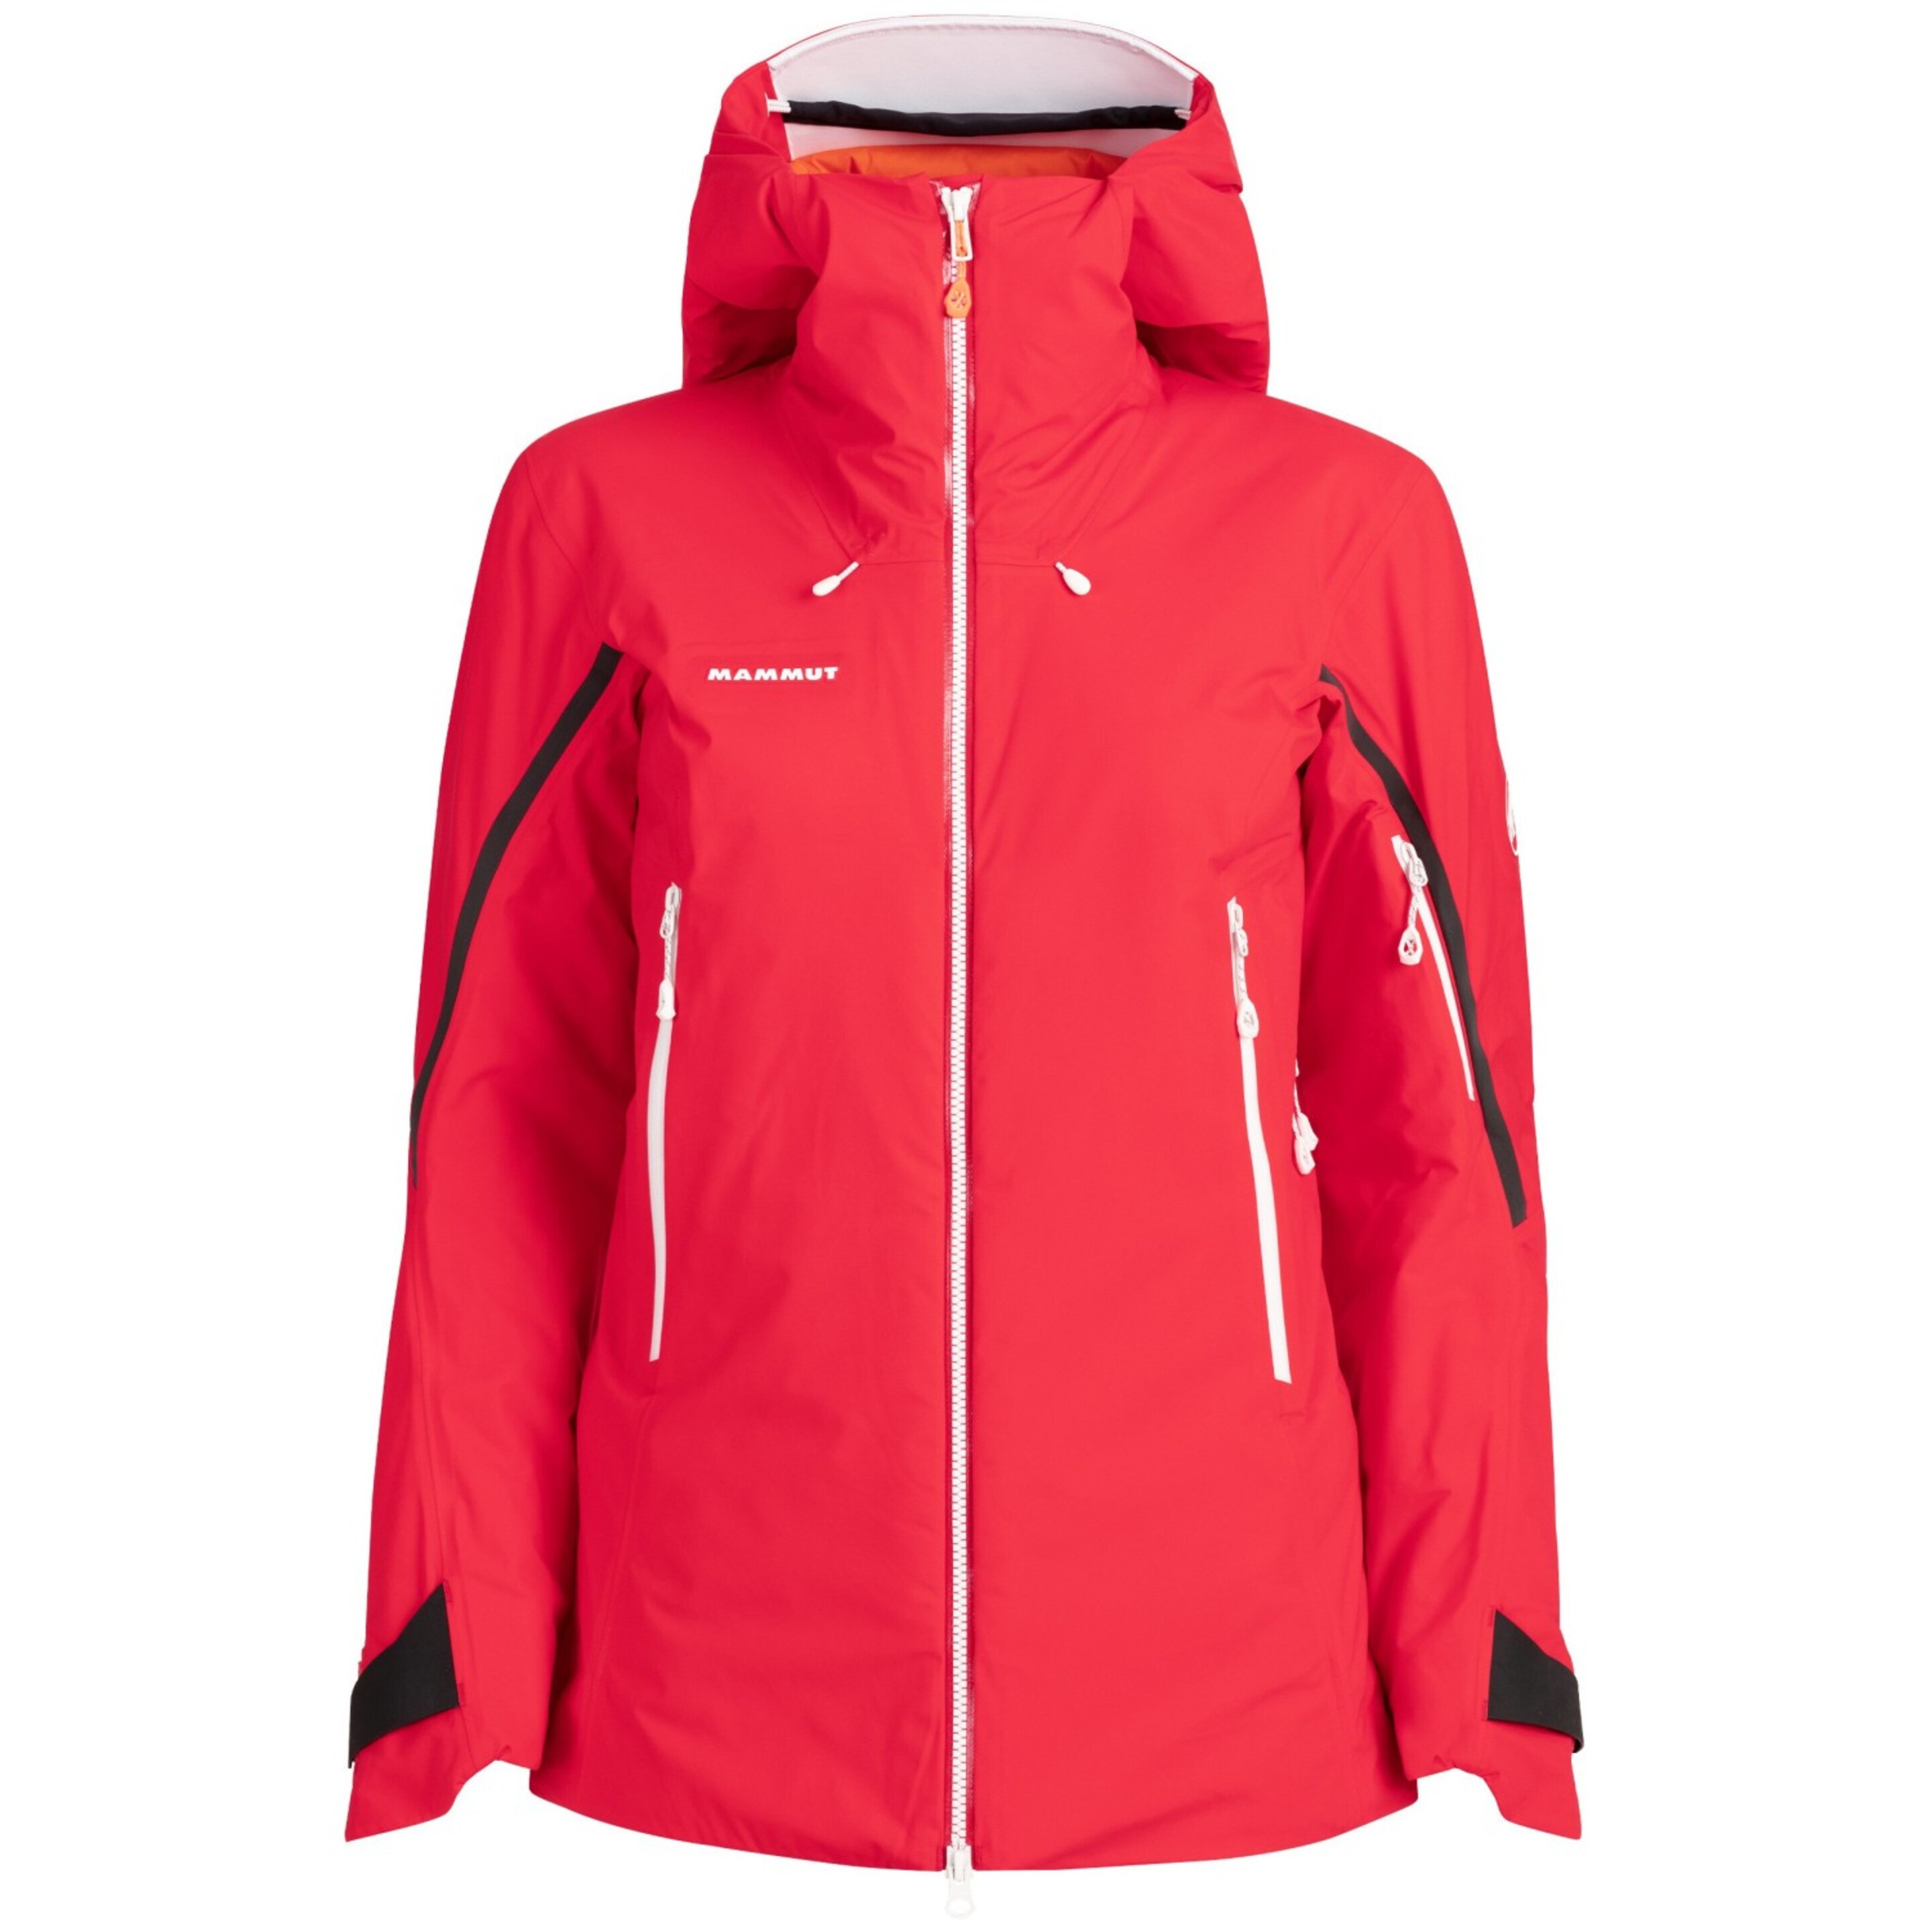 Chaqueta Alpinismo Mujer Nordwand Thermo Hs  Mammut - rojo  MKP